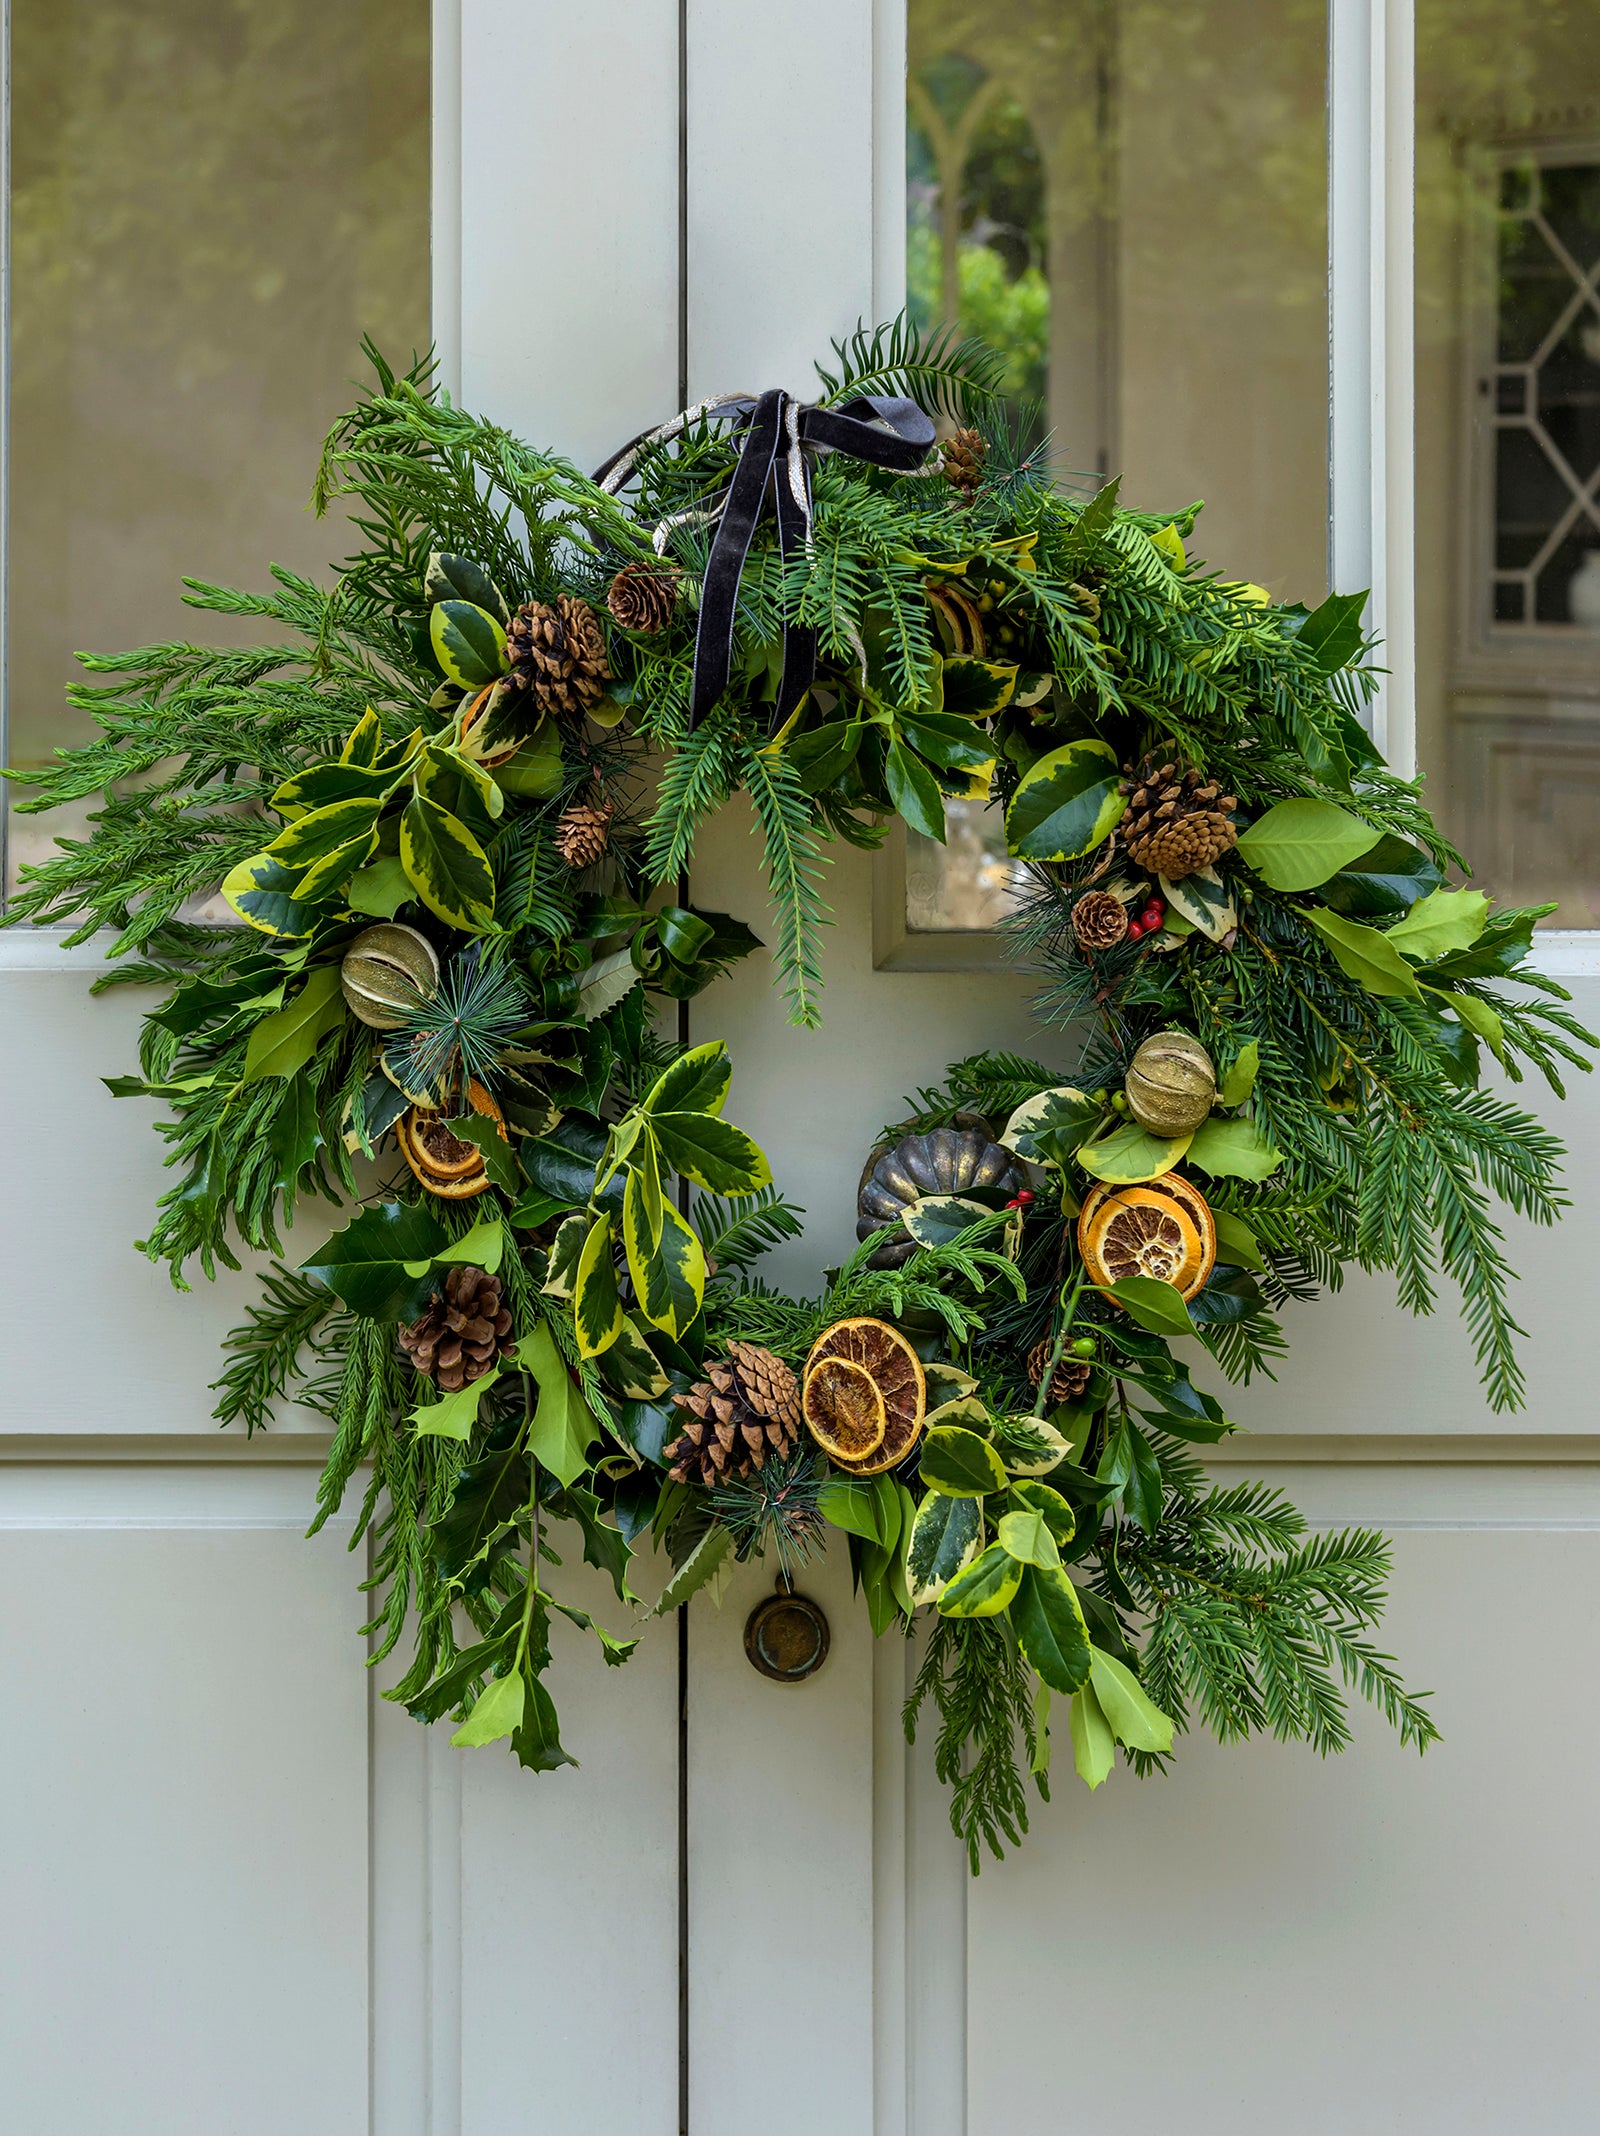 Foliage winter wreath decorated with dried citrus fruits and pinecones.